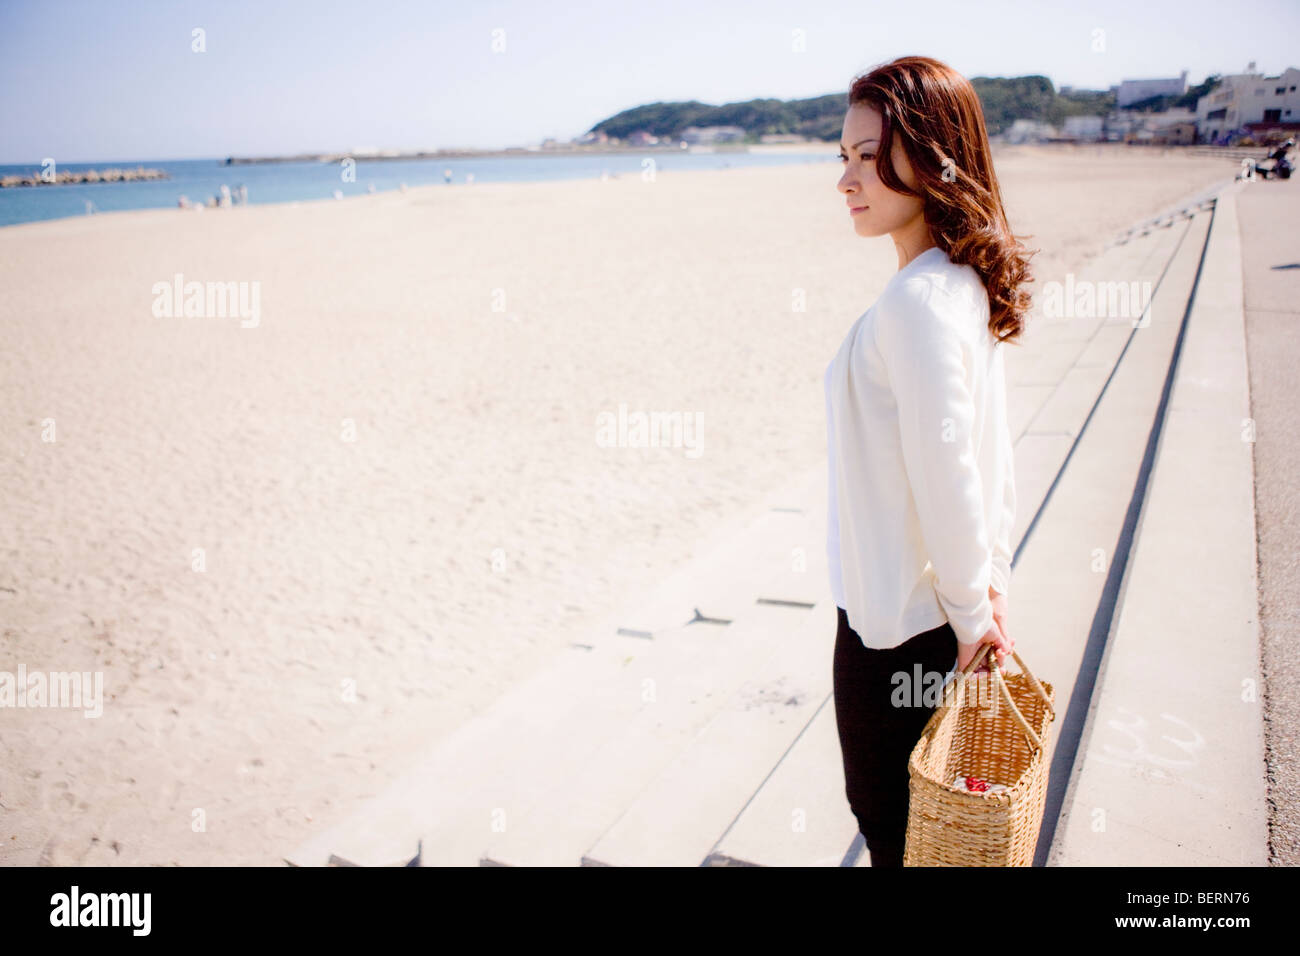 Young woman standing on beach Banque D'Images